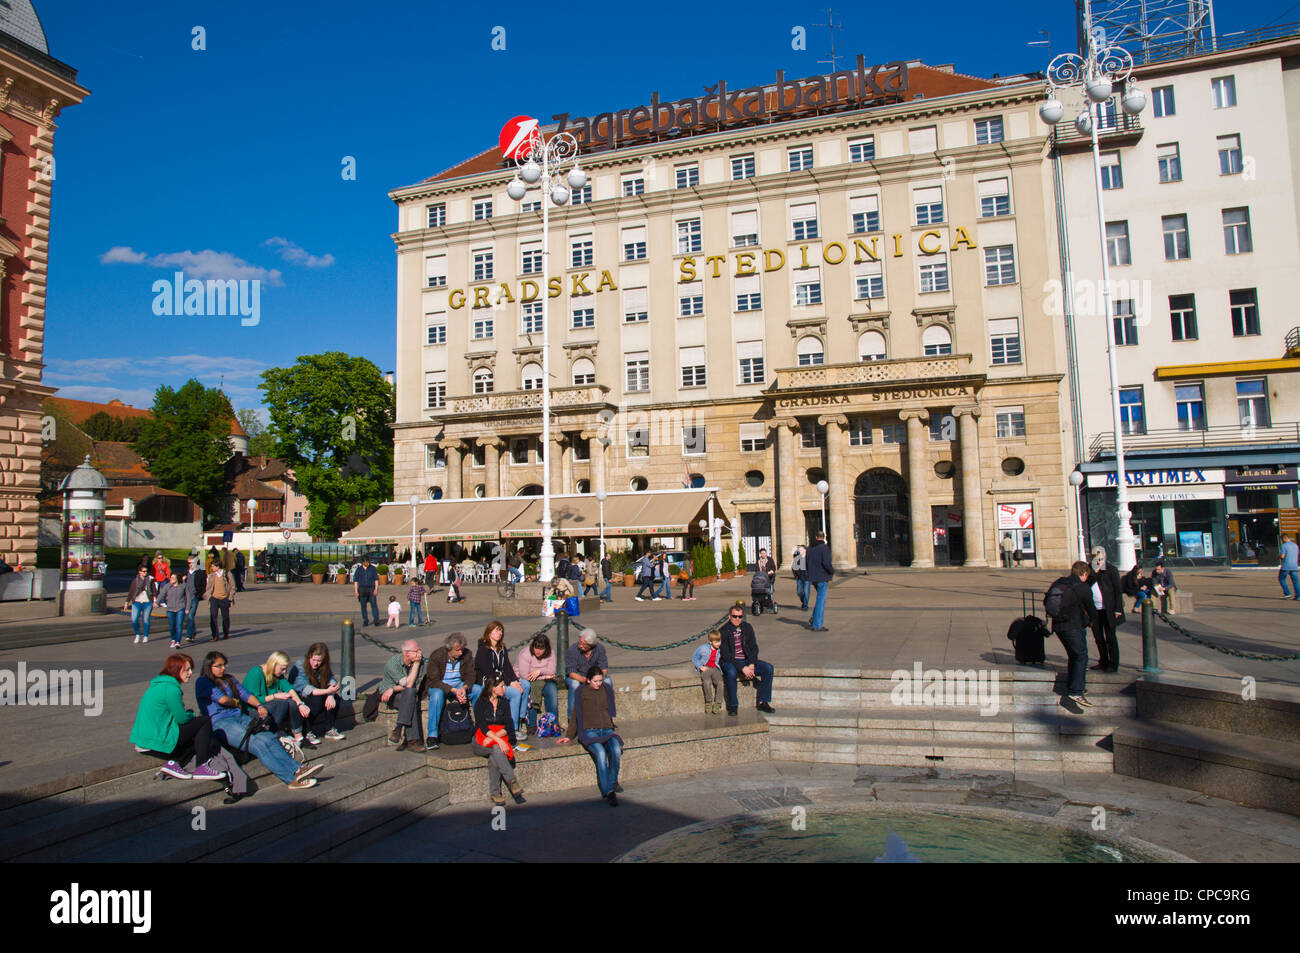 Trg Bana Jelacica Zagreb High Resolution Stock Photography and Images -  Alamy